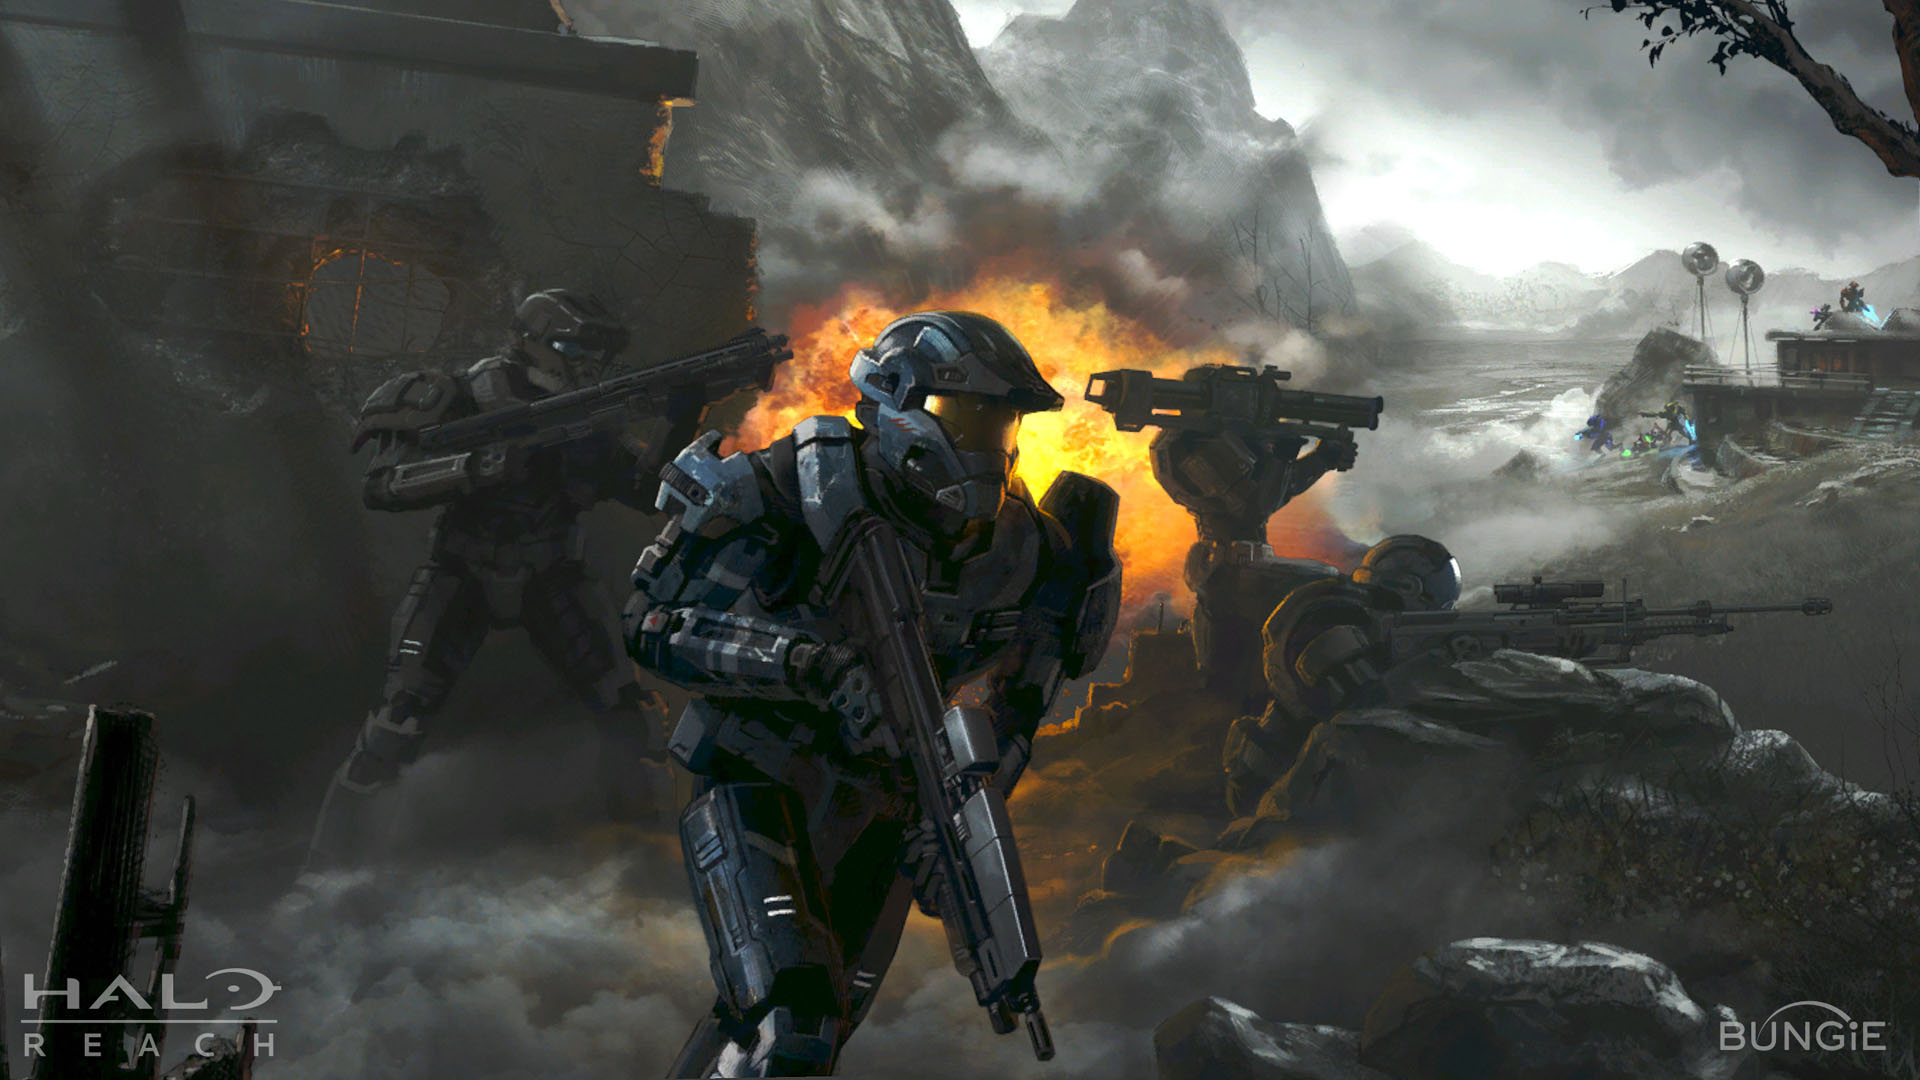 halo reach wallpaper firefight by GIOVANNIMICARELLI on